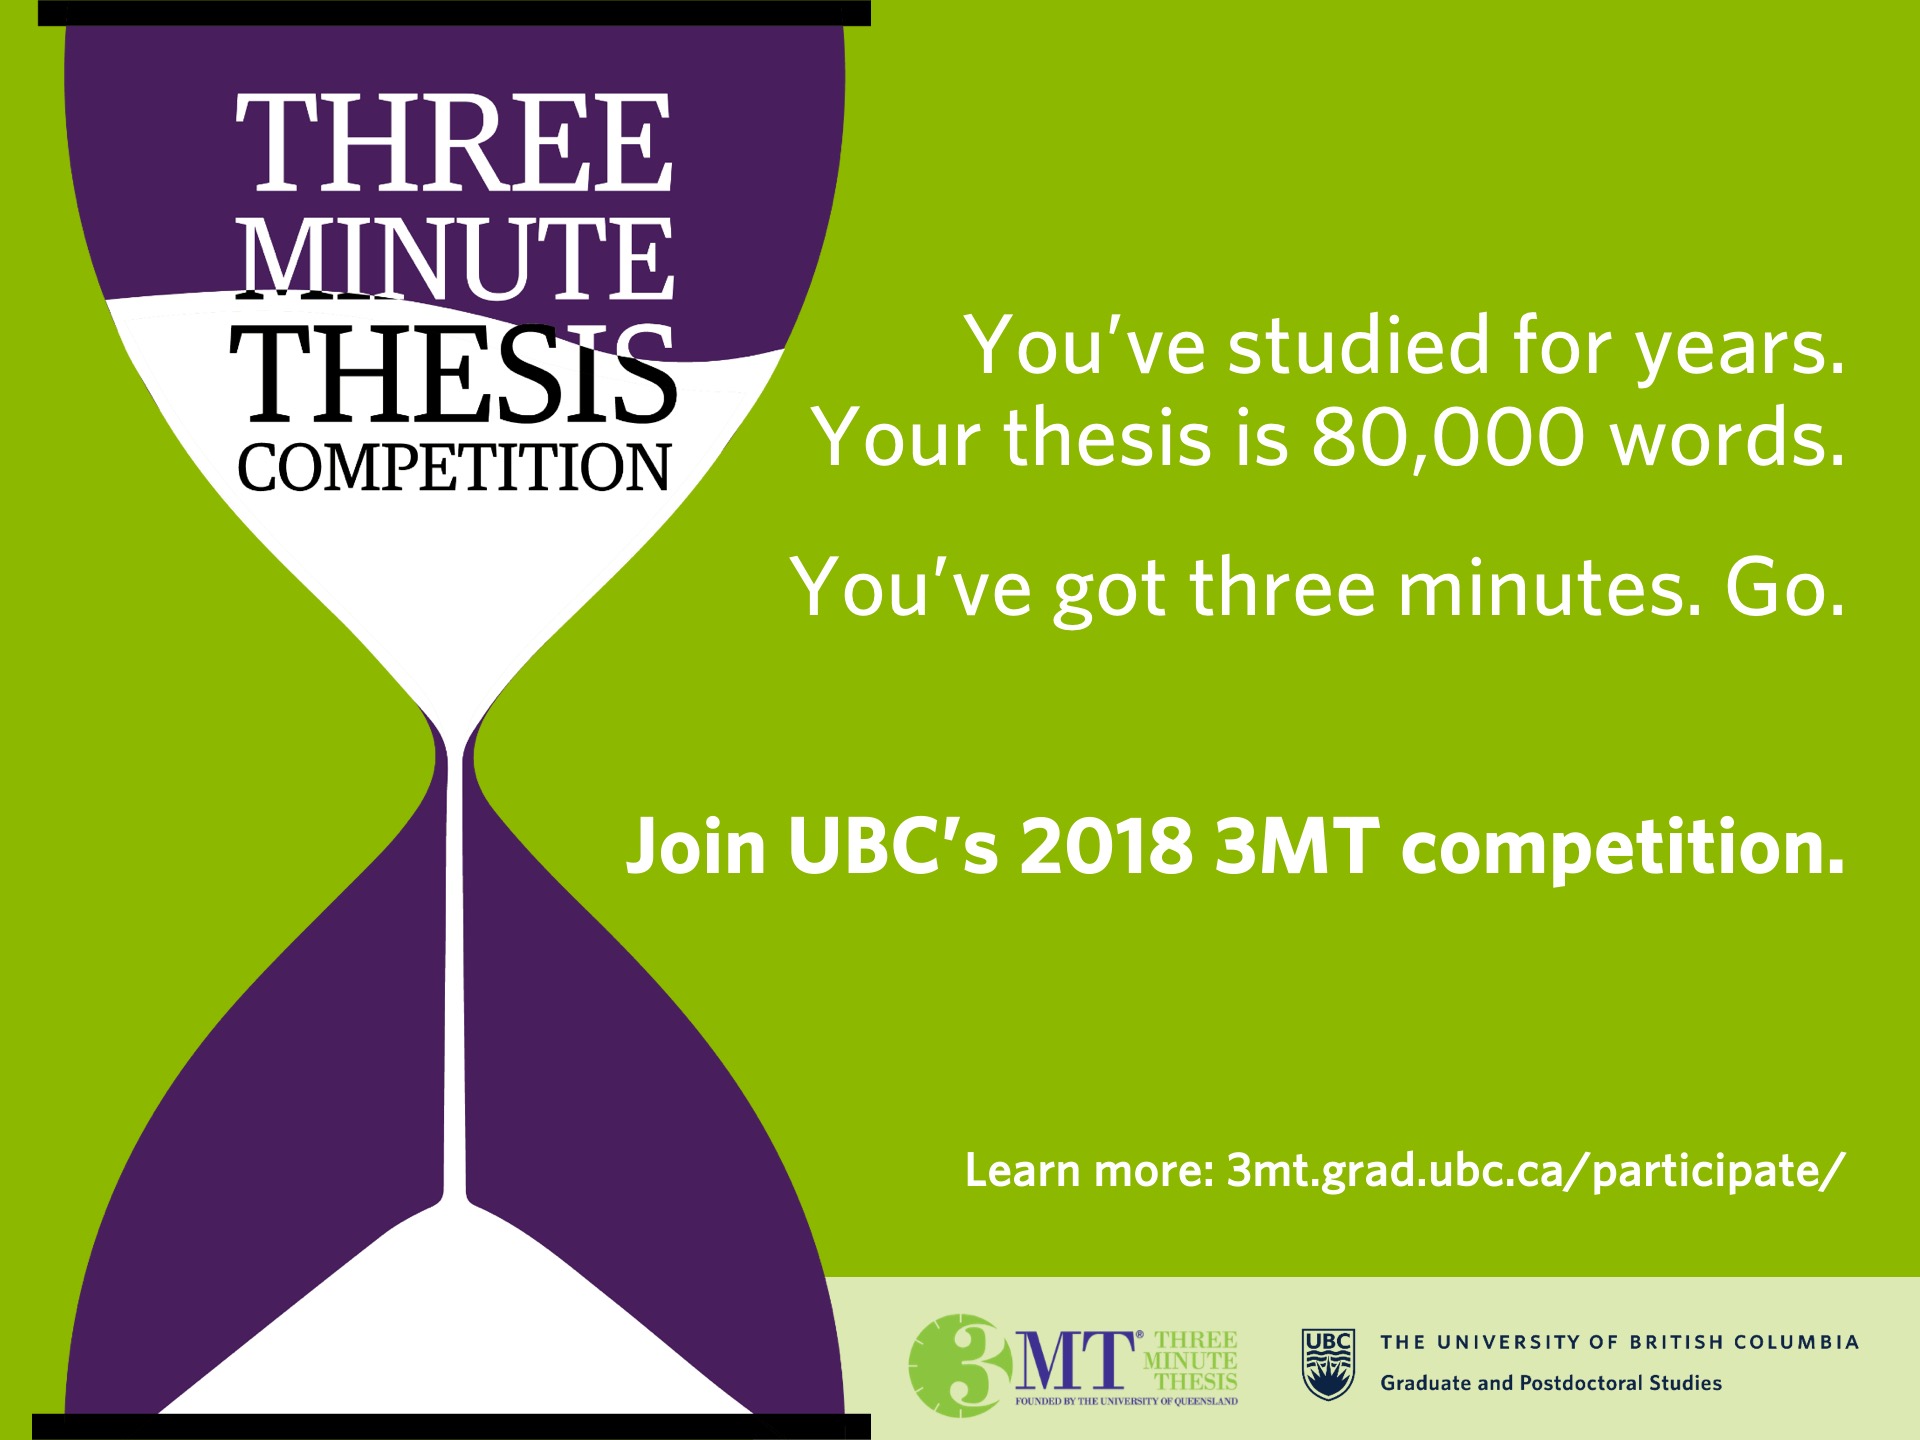 3 minute thesis is